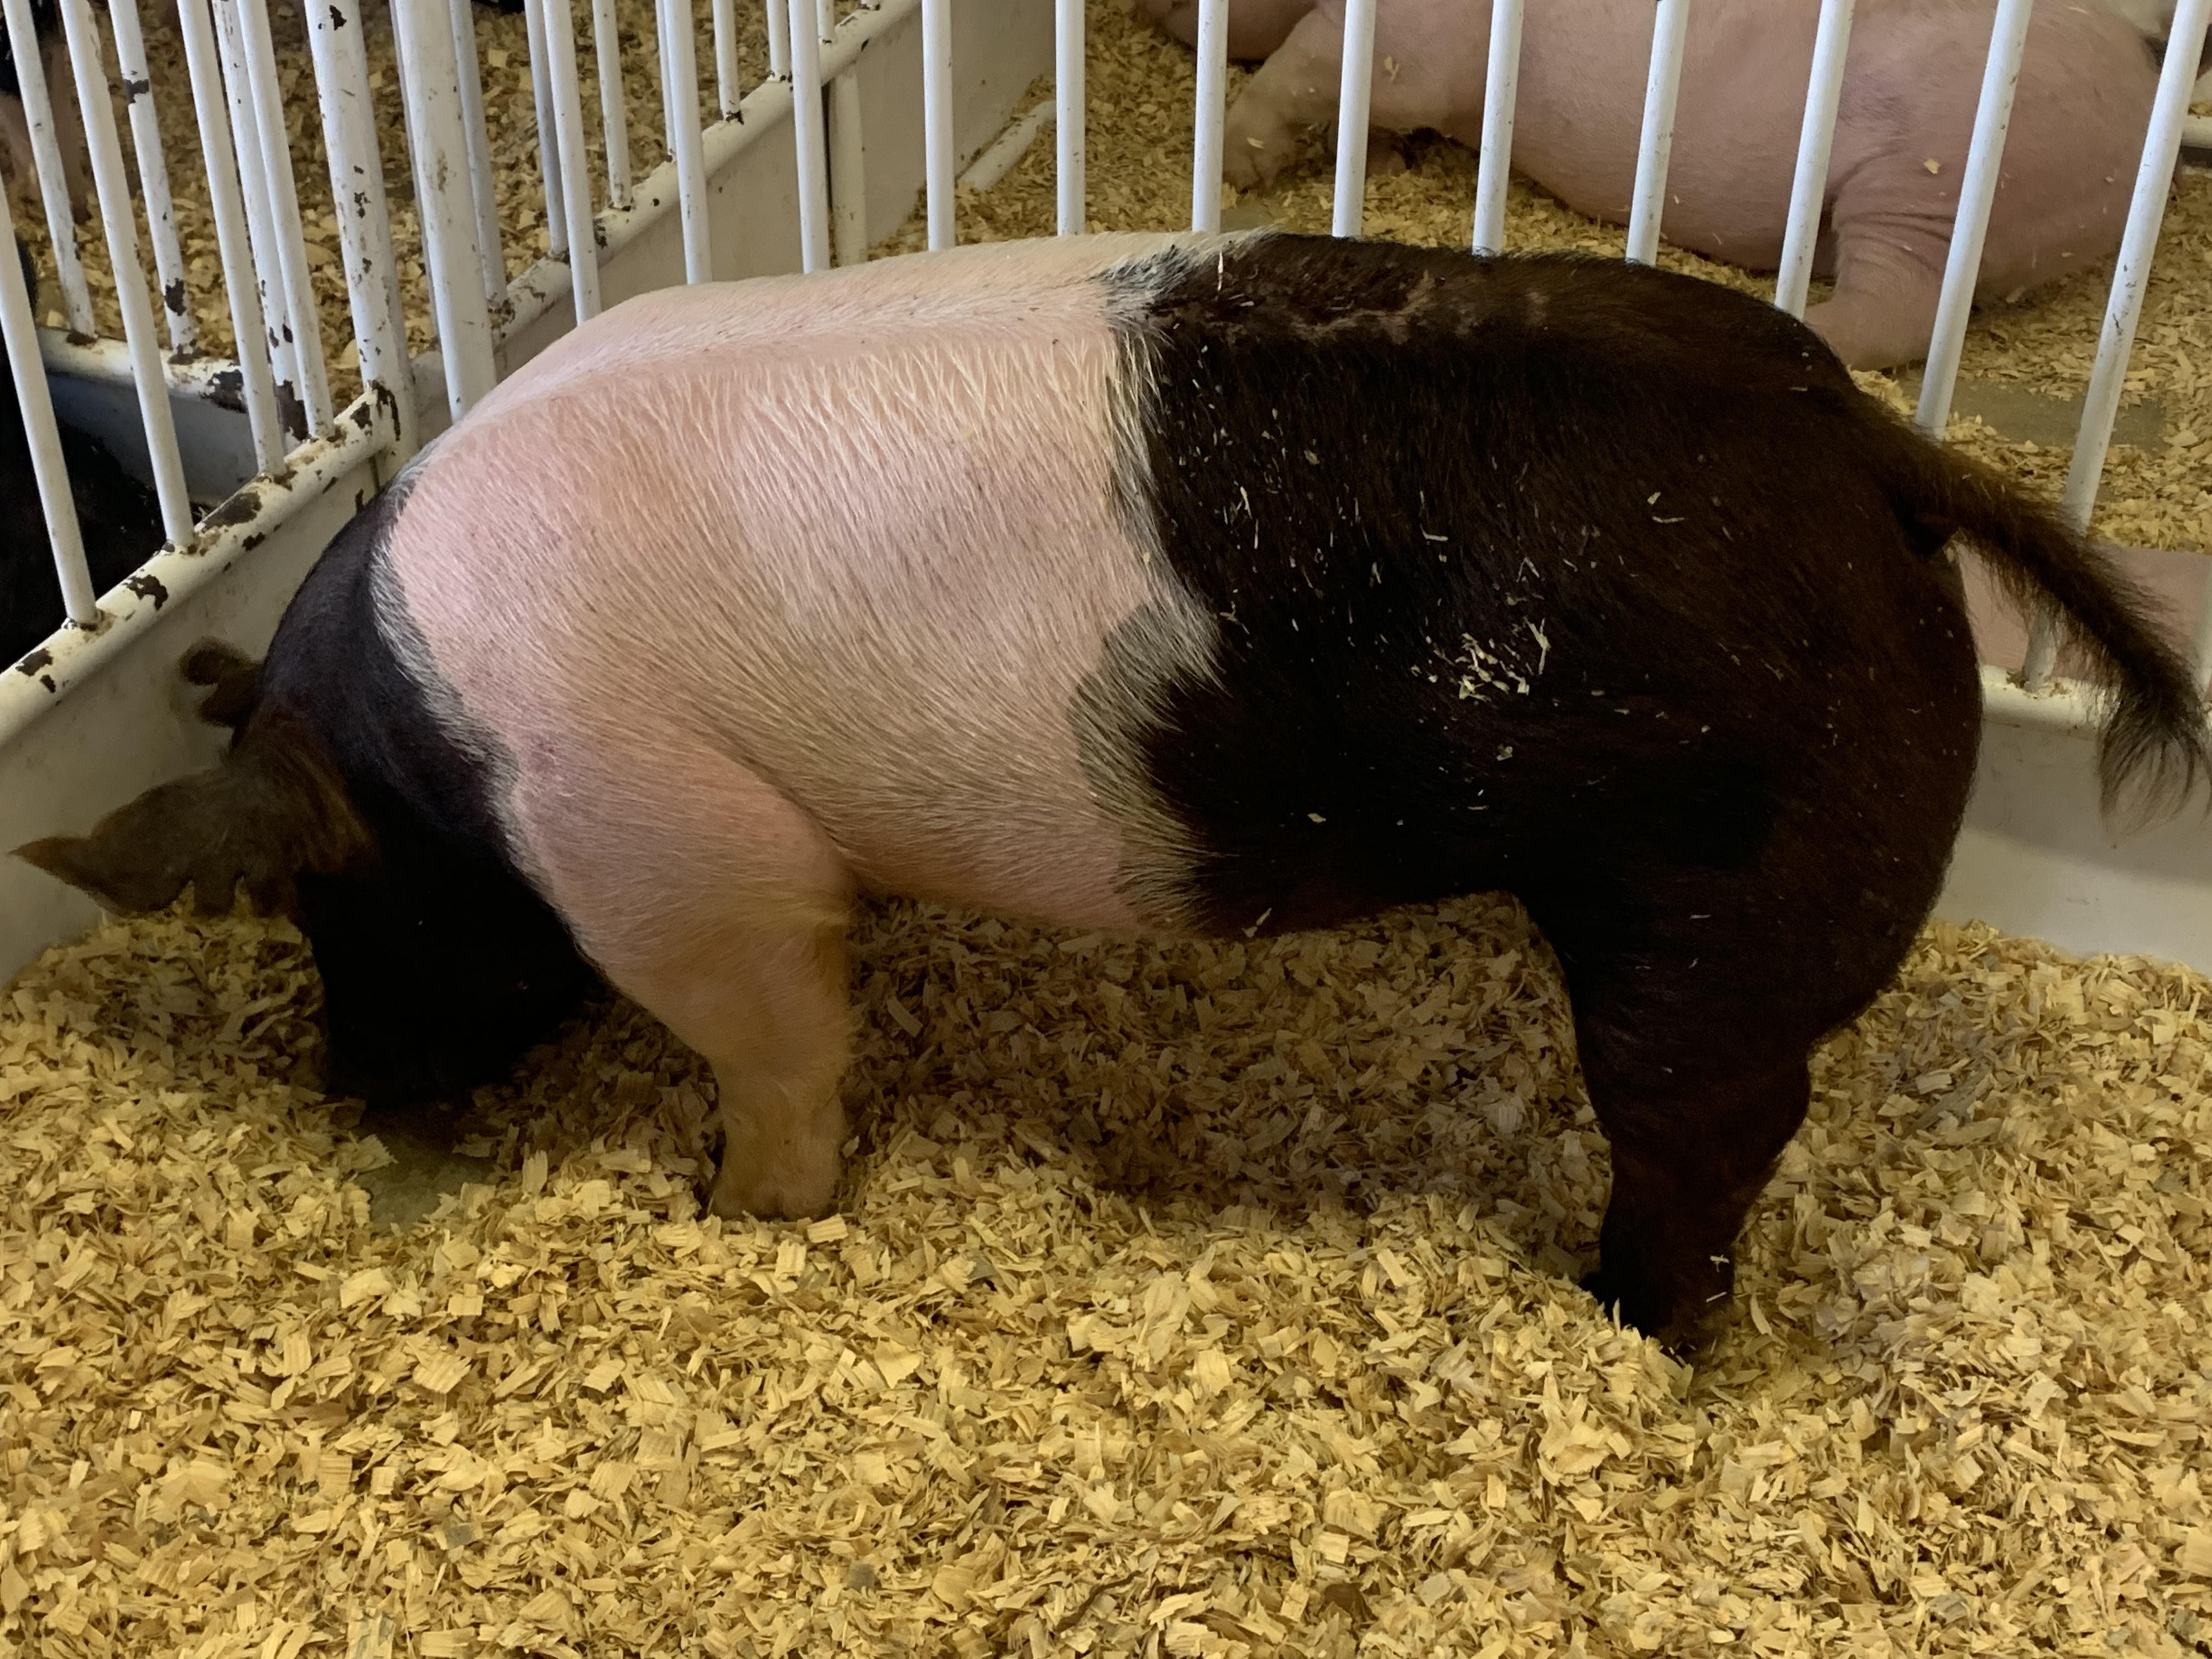 Afternoon Ag News, November 2, 2021: Hog herd growth expected to slow in 2022